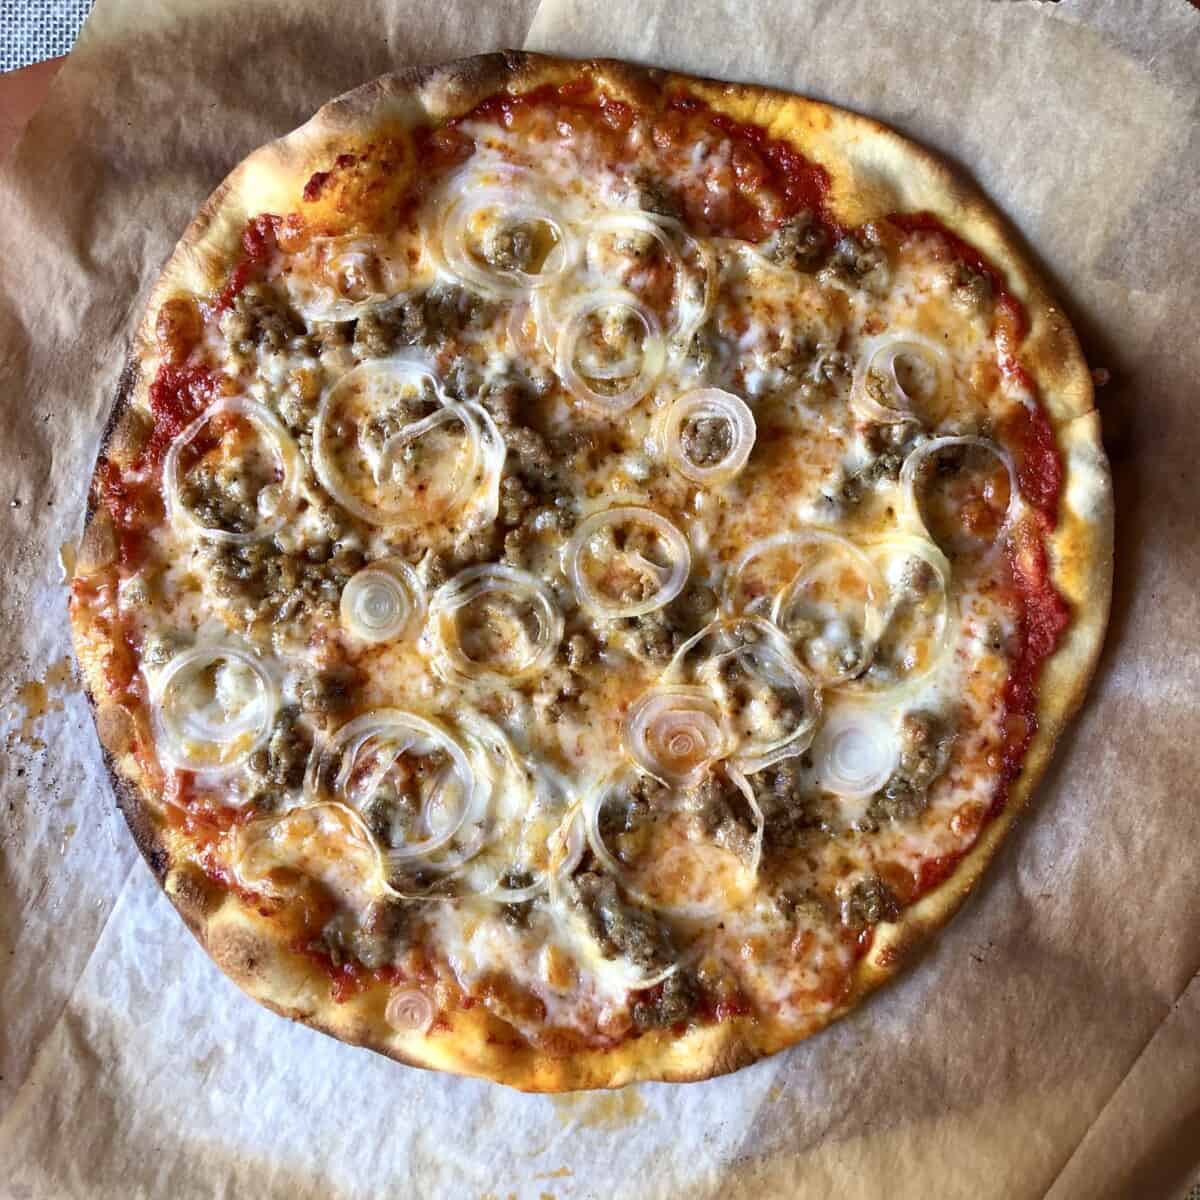 Super crispy homemade sausage and onion pizza just taken out of the oven.